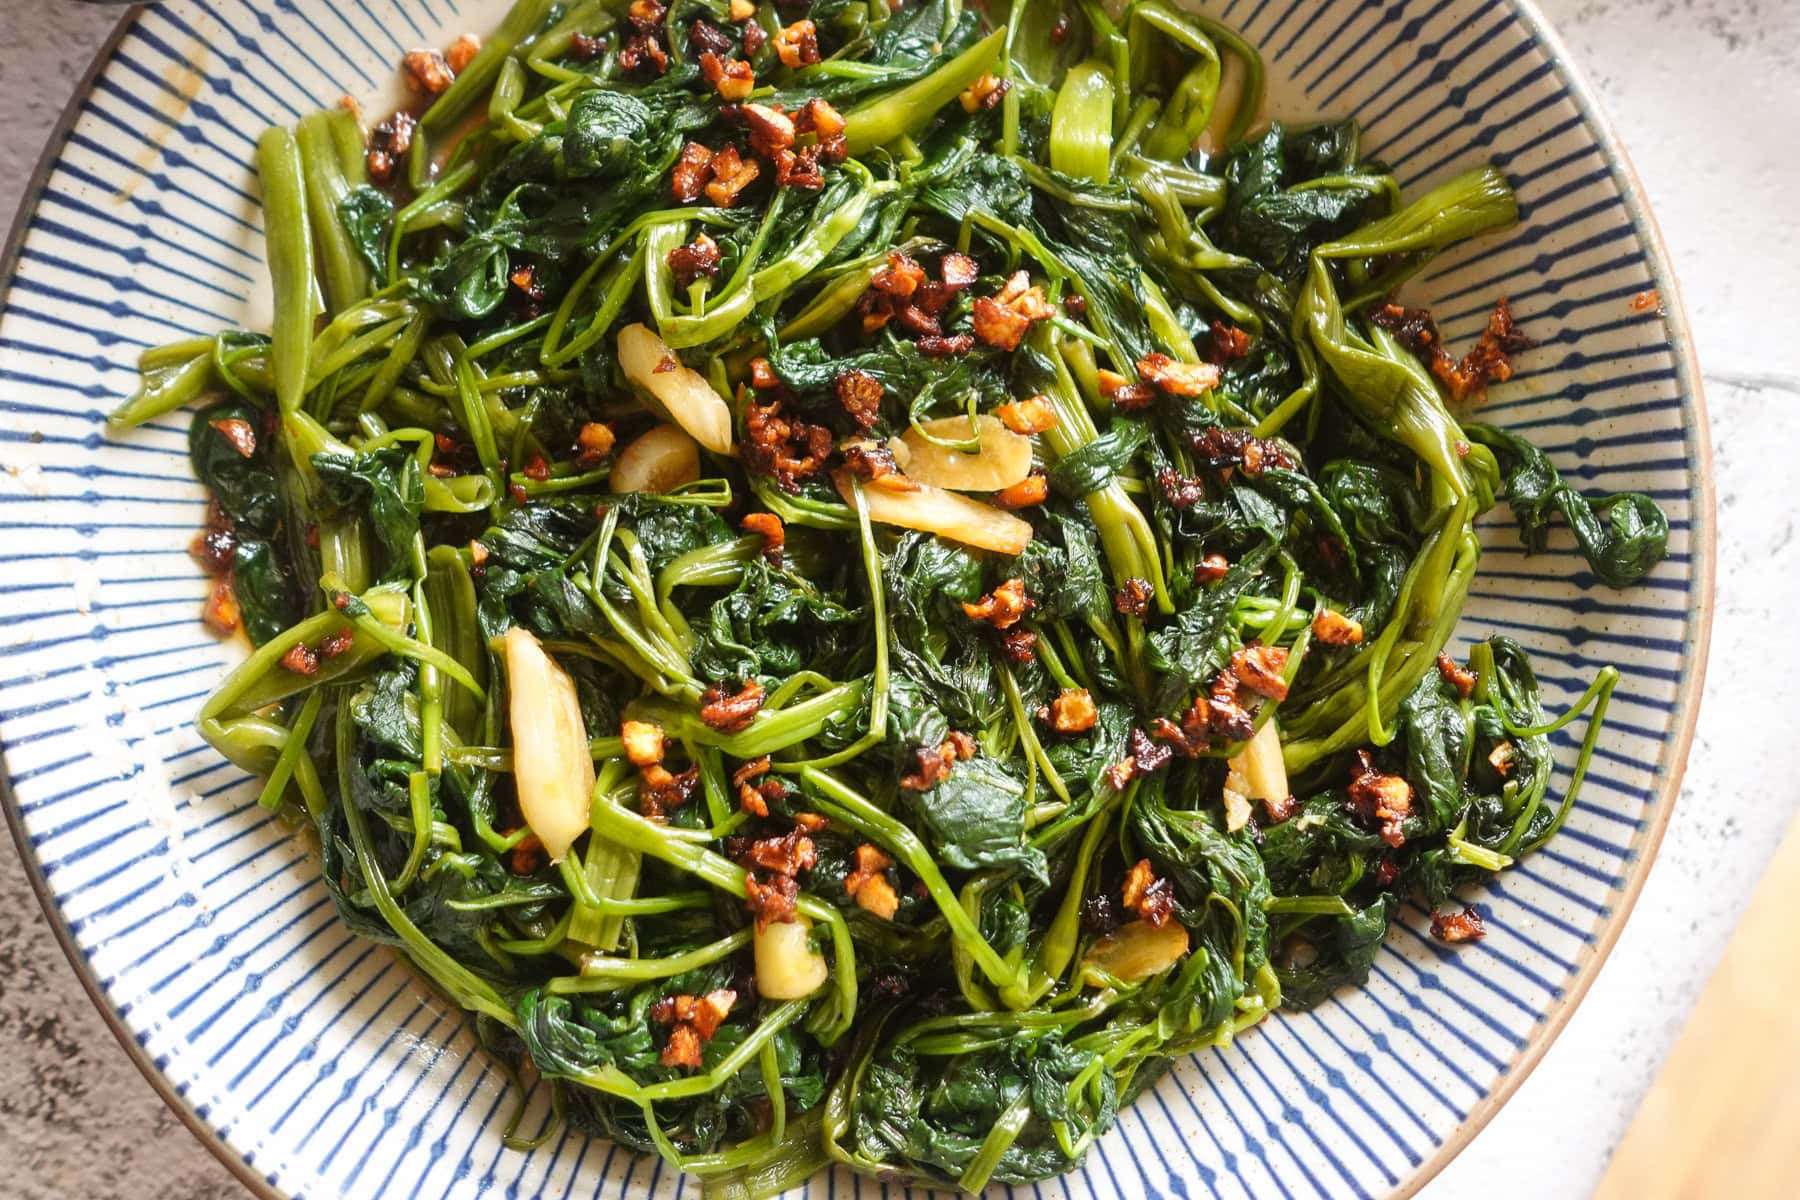 A plate of Morning Glory Stir Fry